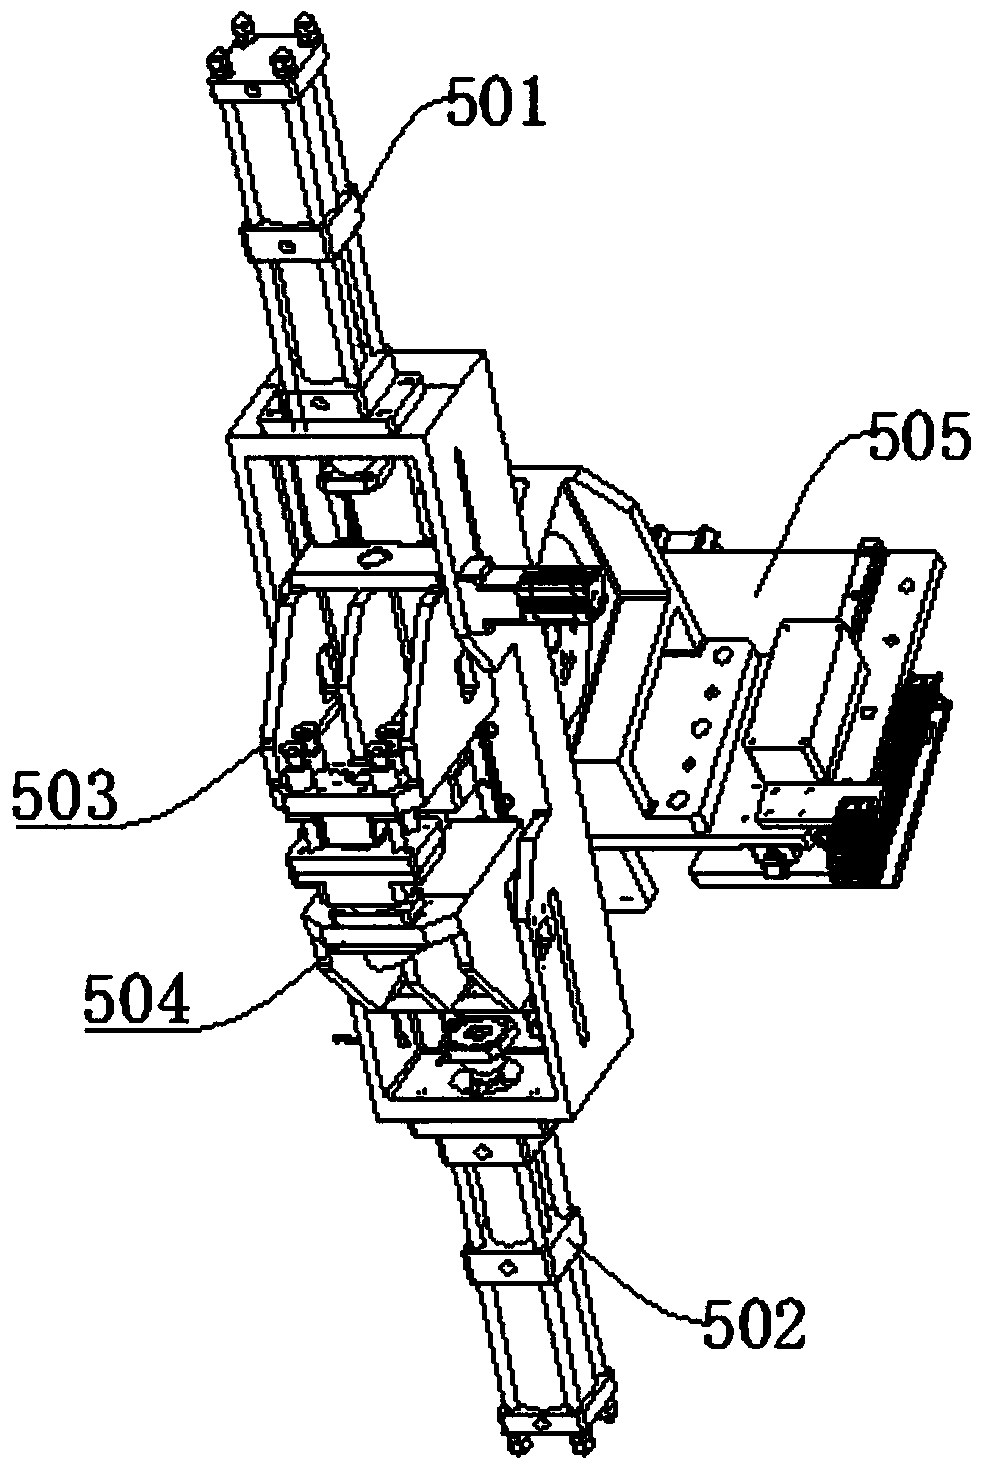 Punching and welding integrated device